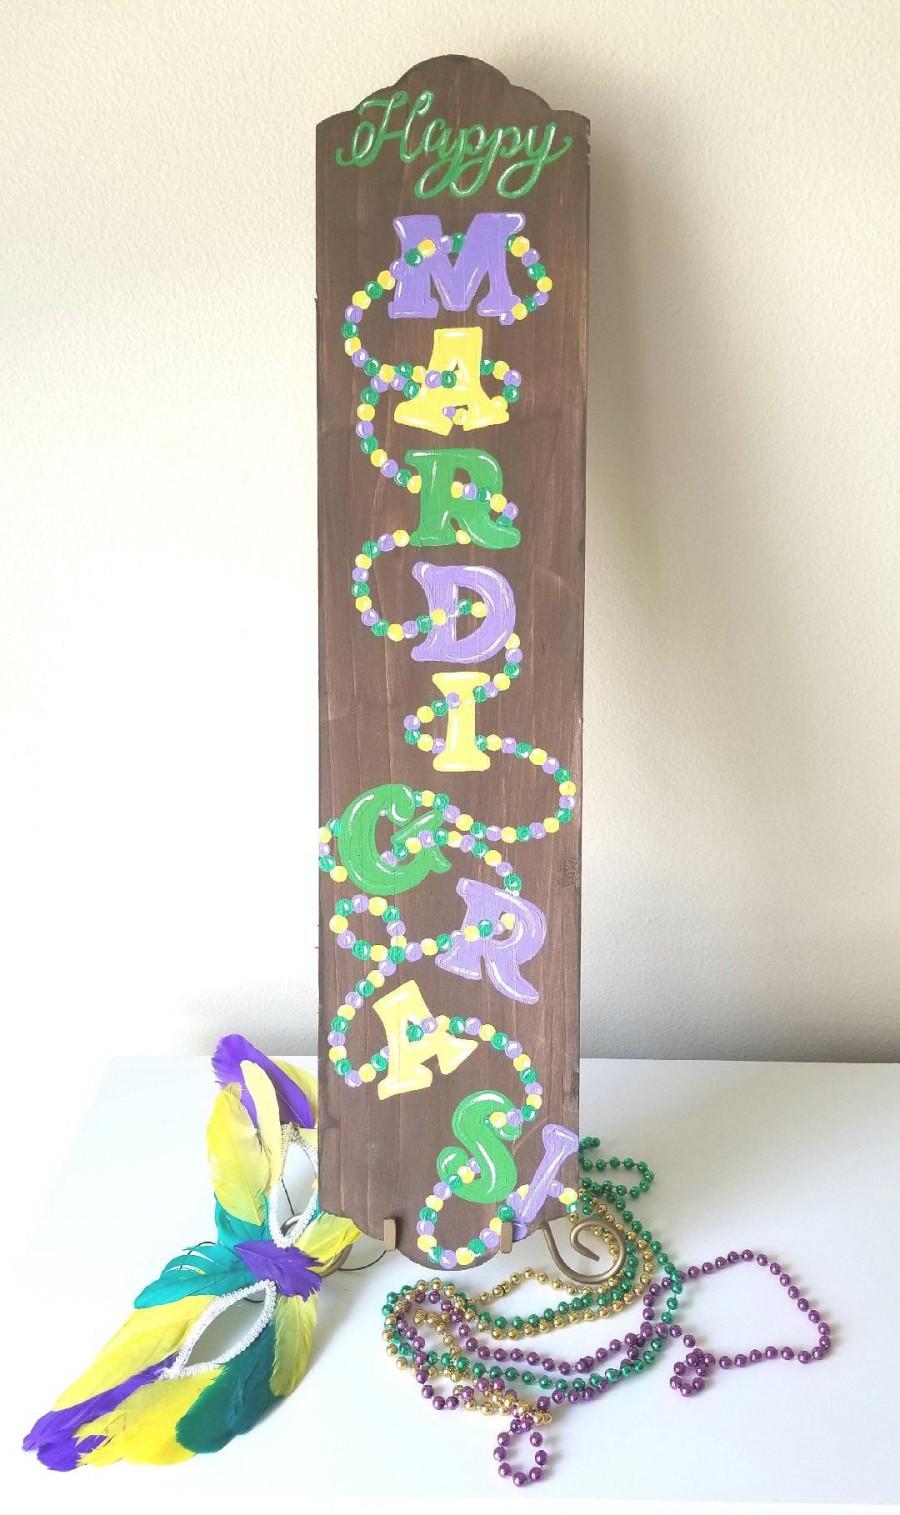 Wedding - Happy Mardi Gras hand painted wood sign indoor or outdoor decor mardi gras colors beads surround letters stand against wall or outside door